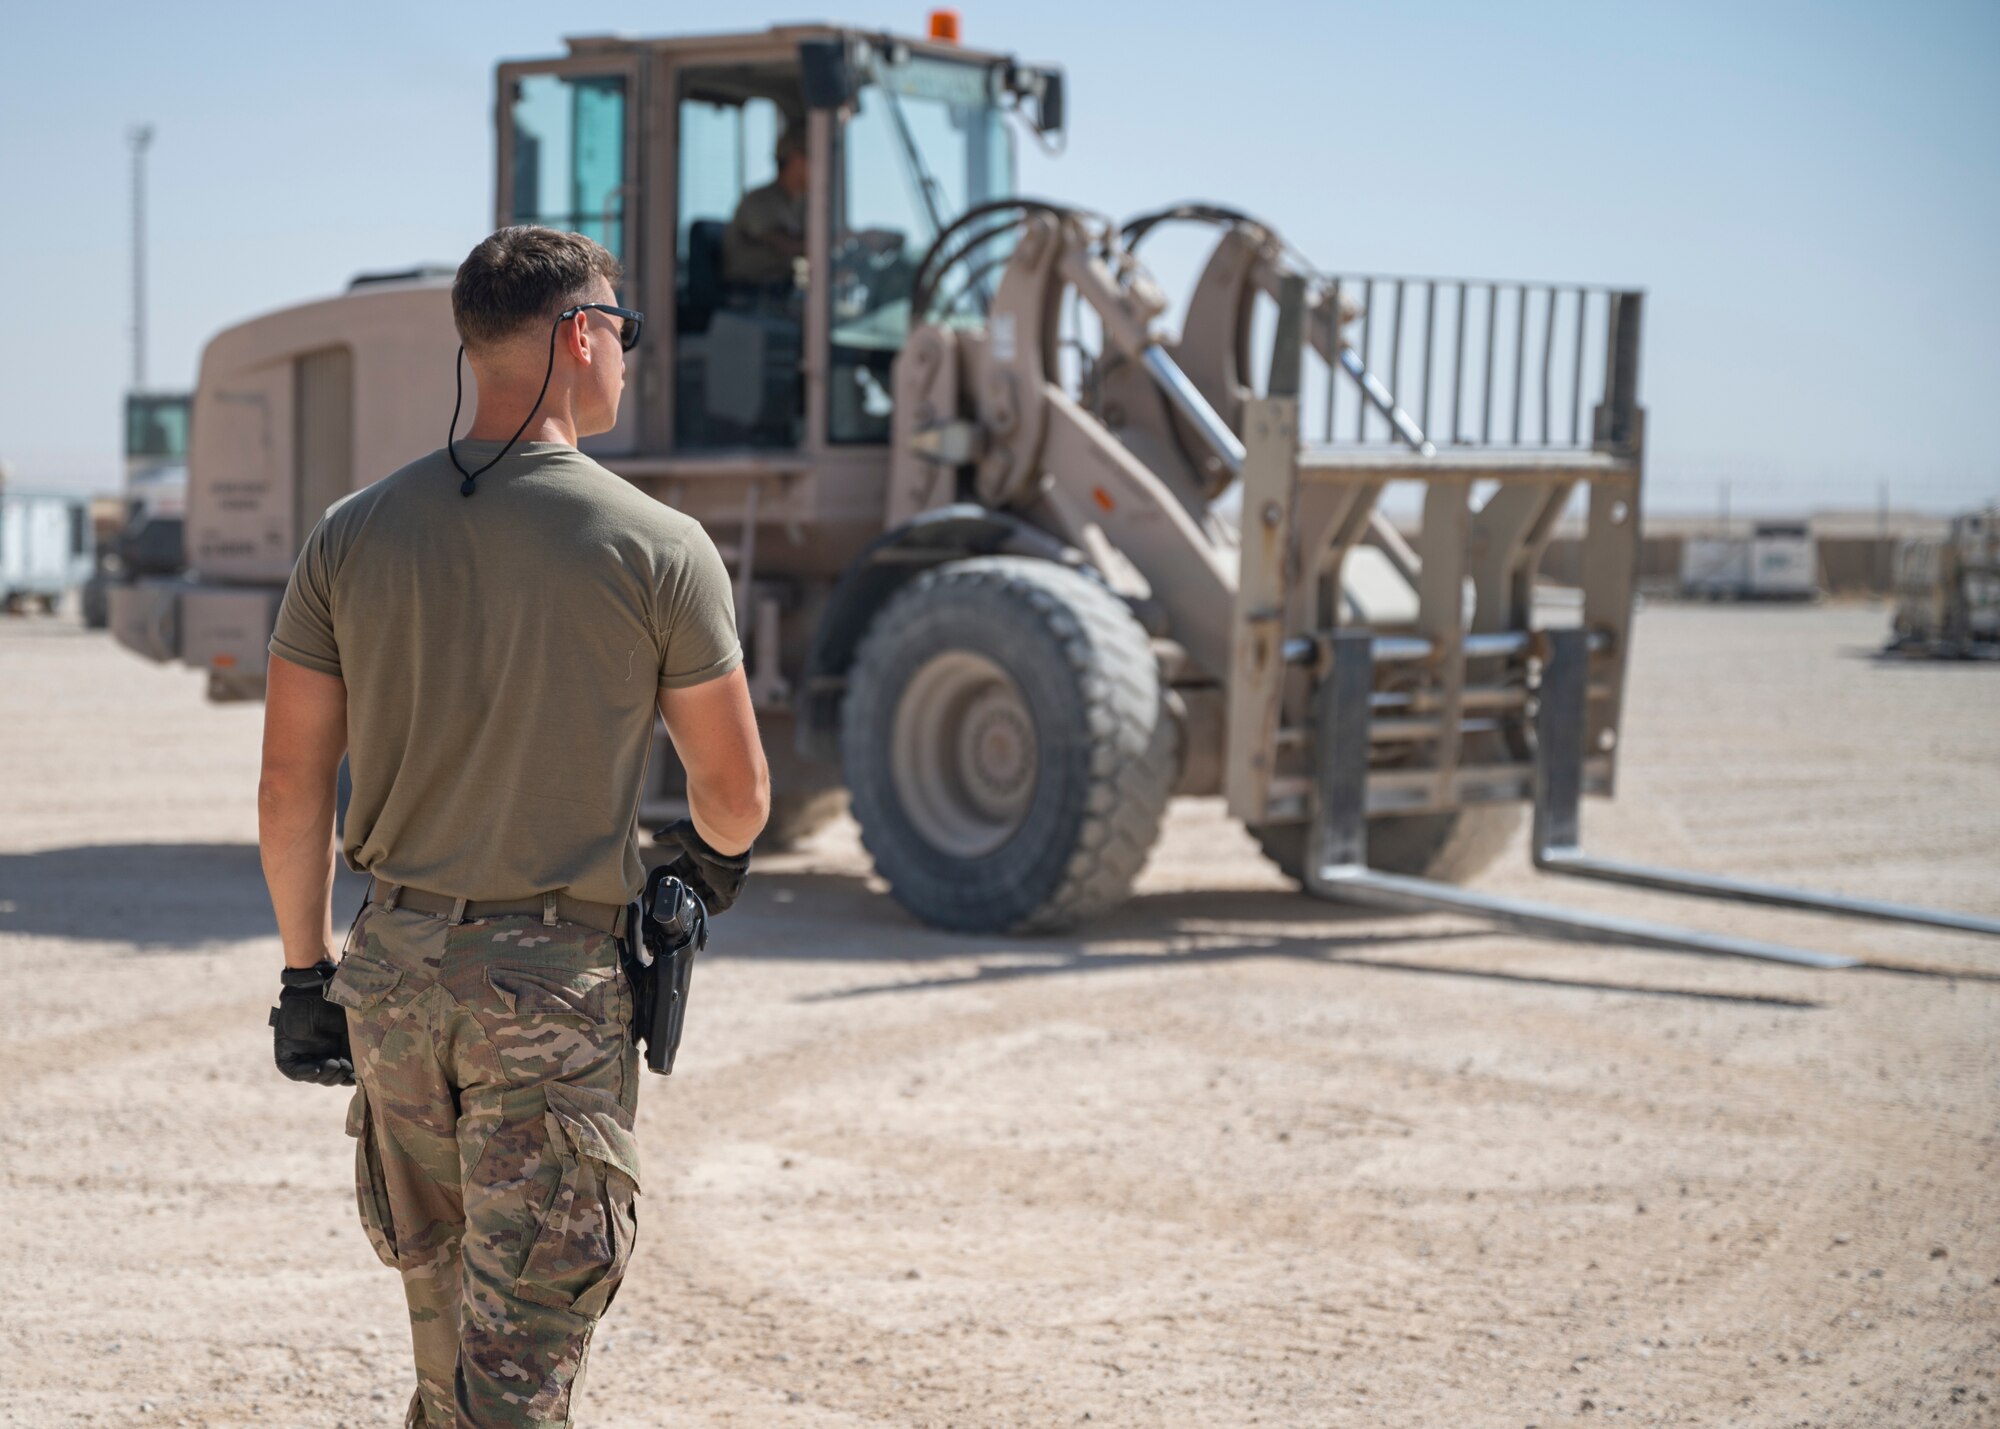 Tech. Sgt. Sean Ofiara observes as U.S. Air Force Staff Sgt. Robert Ignacio, assigned to the 443rd Air Expeditionary Squadron, moves cargo at Al Asad Air Base, Iraq, Sept. 22, 2021.